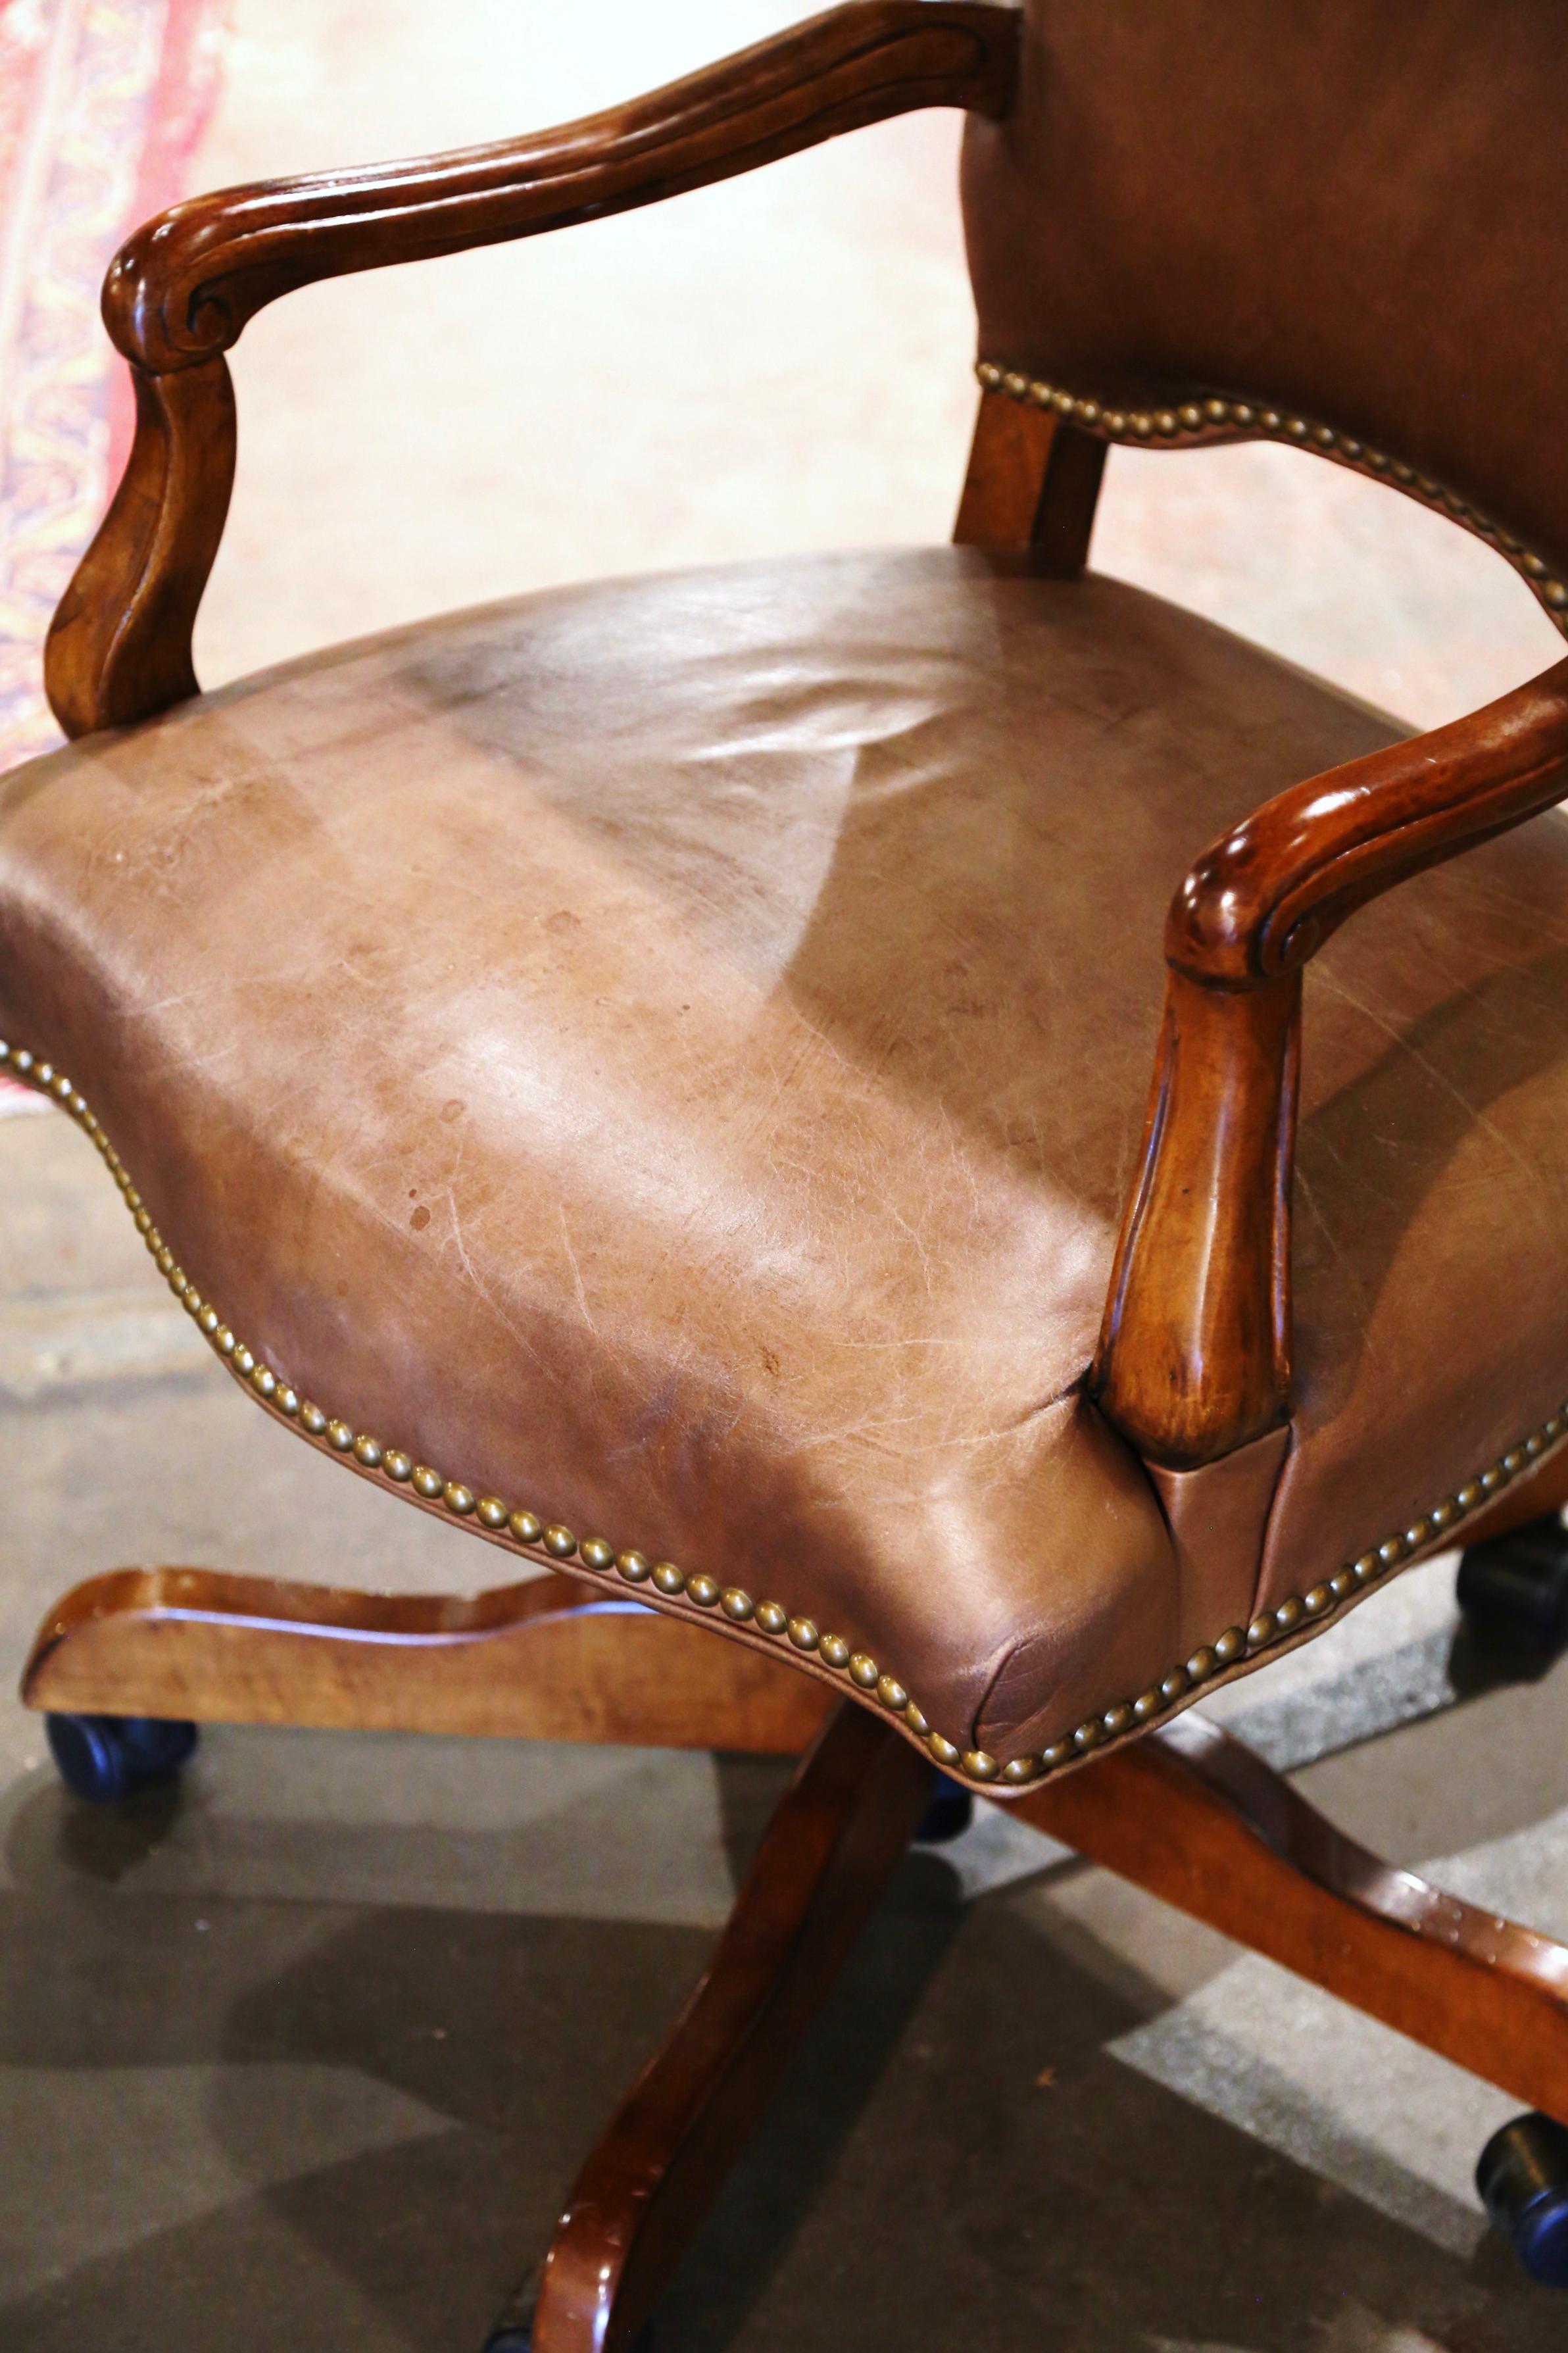 Dress a man's office or study with this elegant vintage armchair. Hand crafted circa 1970 in a masculine style, the chair stands on a swivel base with wooden legs ending in metal casters. The tall chair with elegant beechwood open arm rest, is